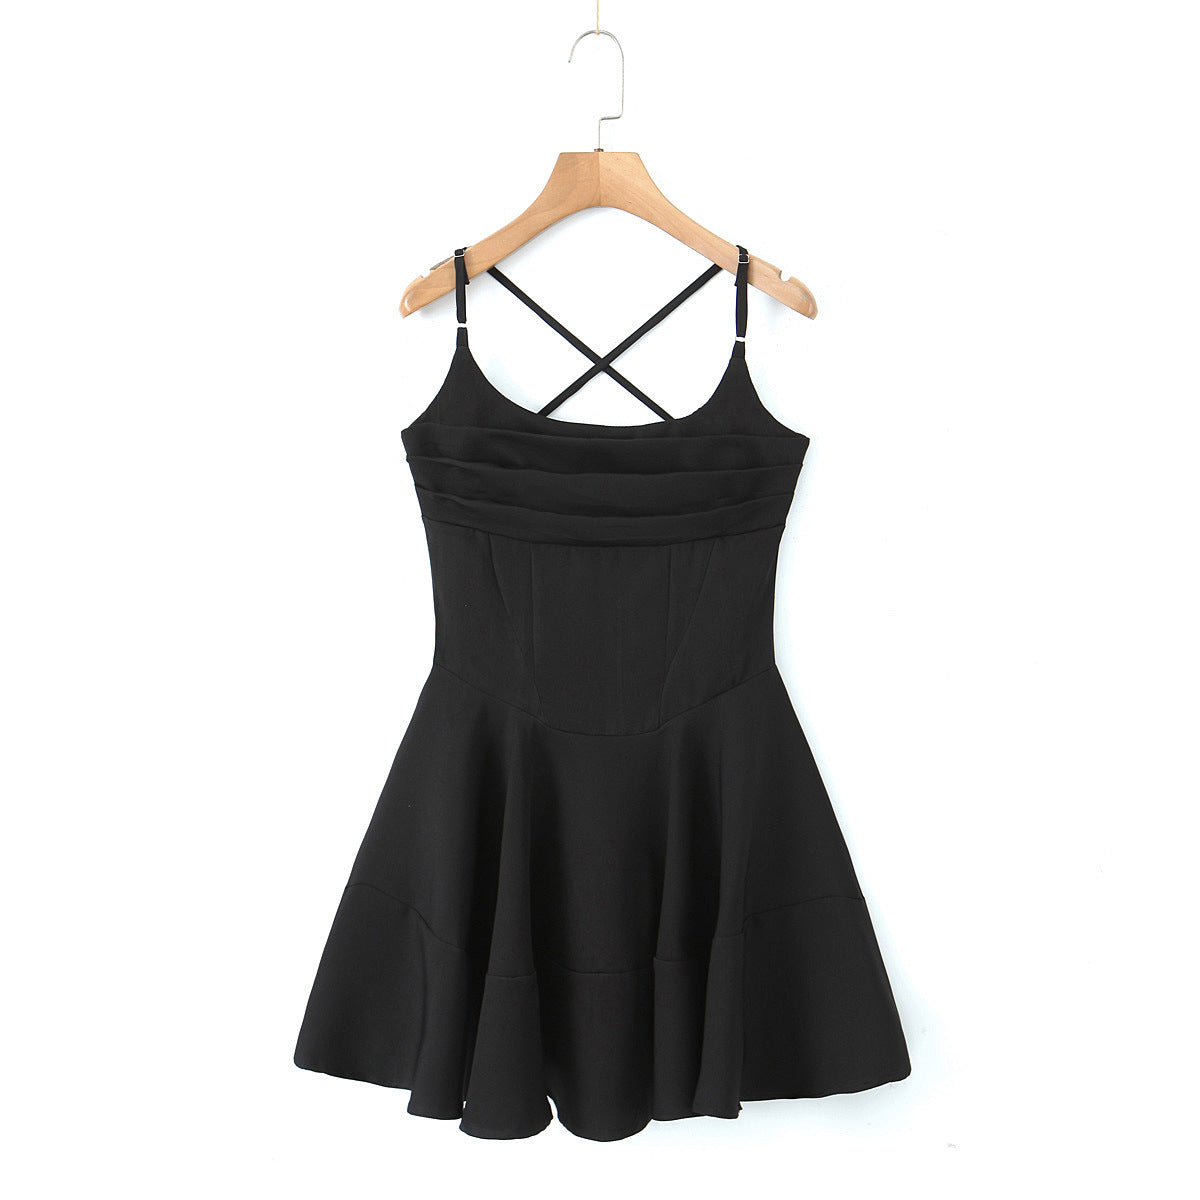 Simple and Stylish Backcross Dress